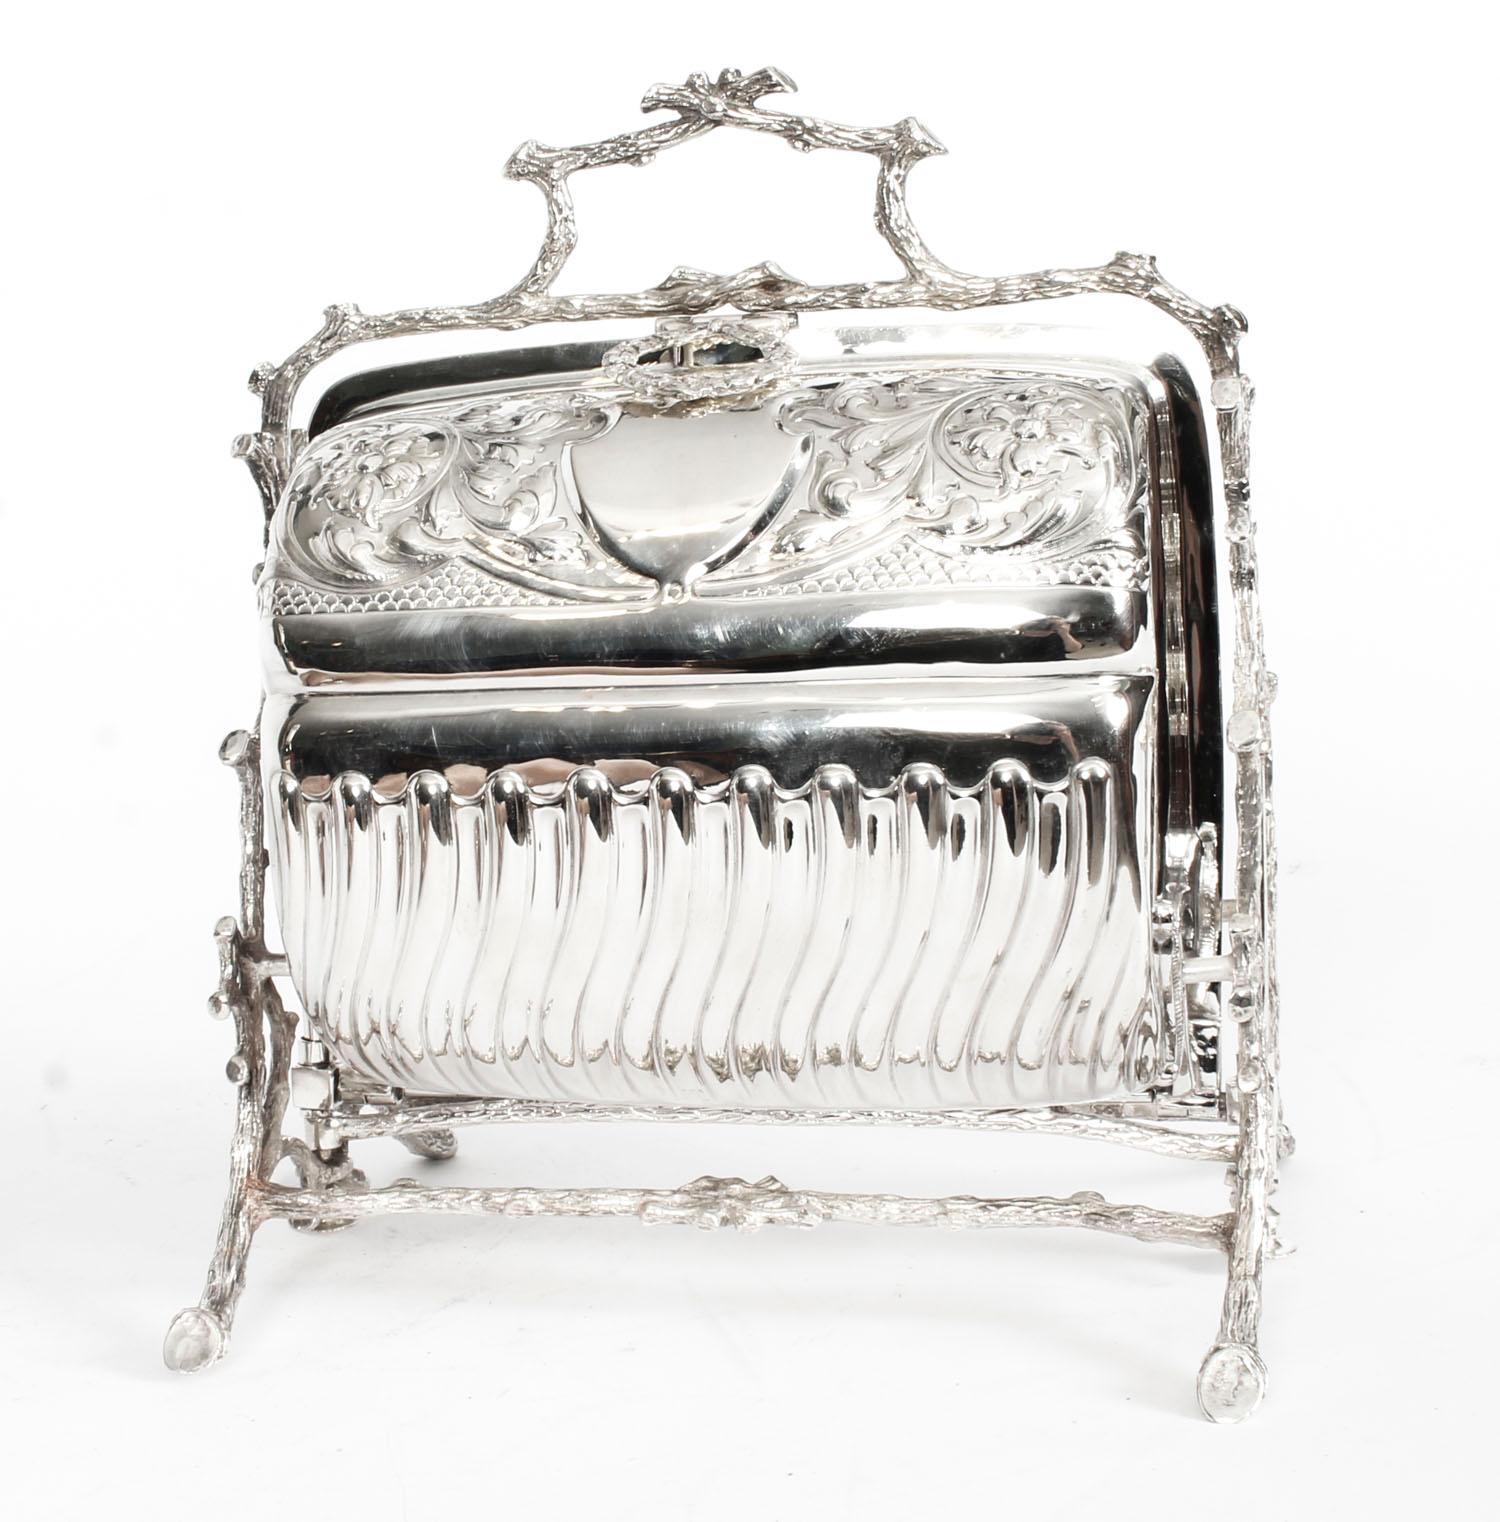 This is a superb antique Victorian silver plated folding biscuit box made by Mappin & Webb- Princes Plate reg No 71553, circa 1880 indate.

The opening mechanism is as intricate as the laurel wreath decoration, it features a foliate engraved body